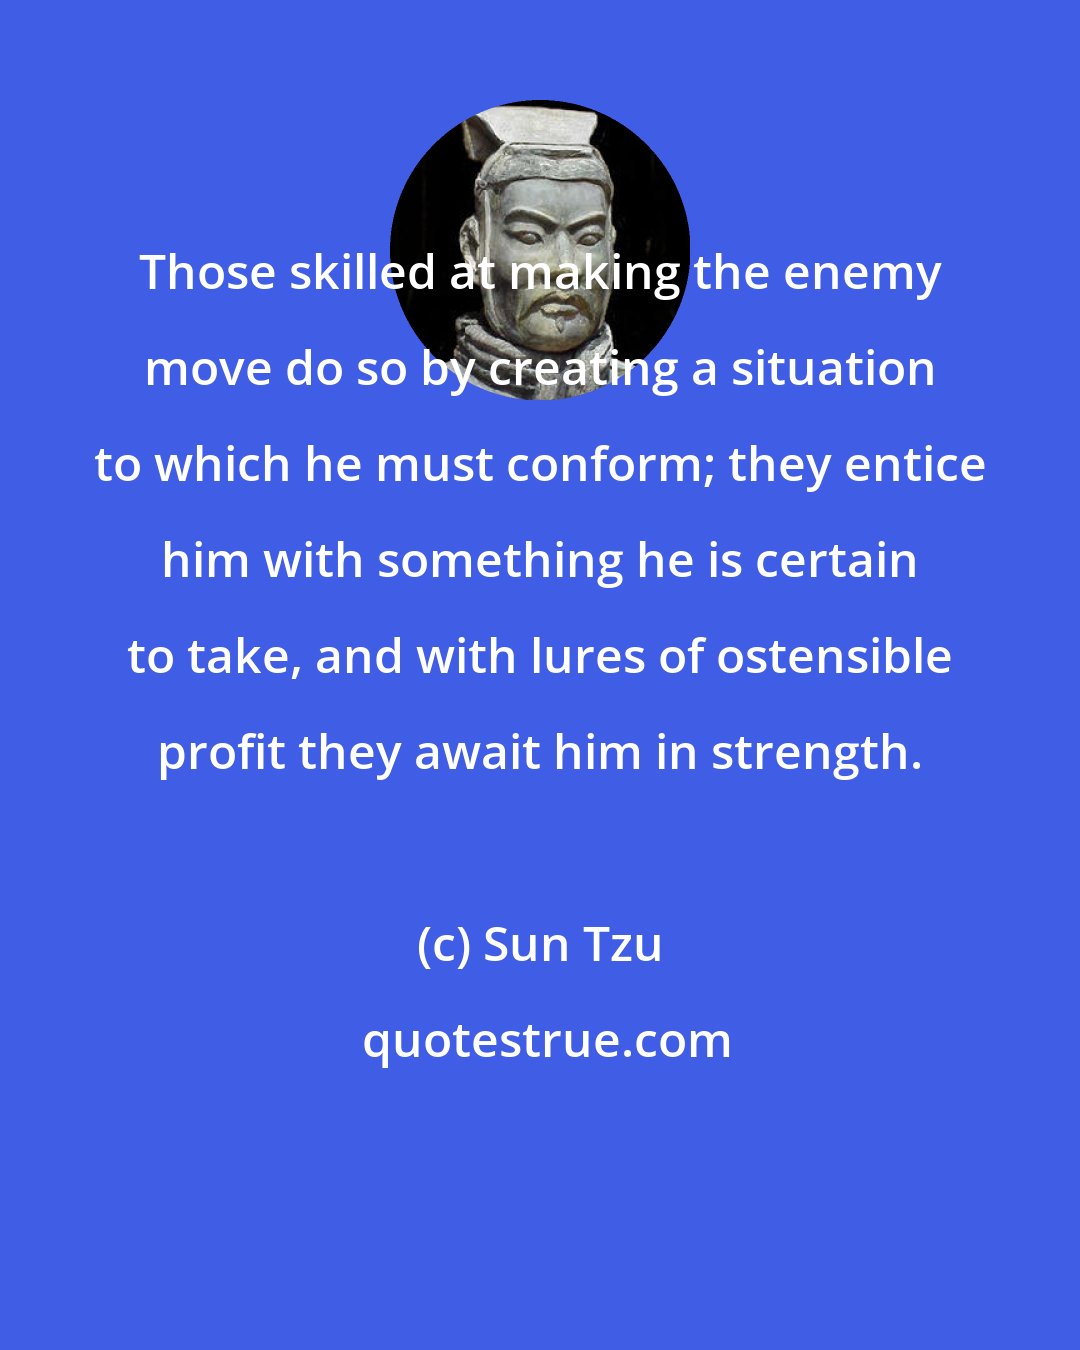 Sun Tzu: Those skilled at making the enemy move do so by creating a situation to which he must conform; they entice him with something he is certain to take, and with lures of ostensible profit they await him in strength.